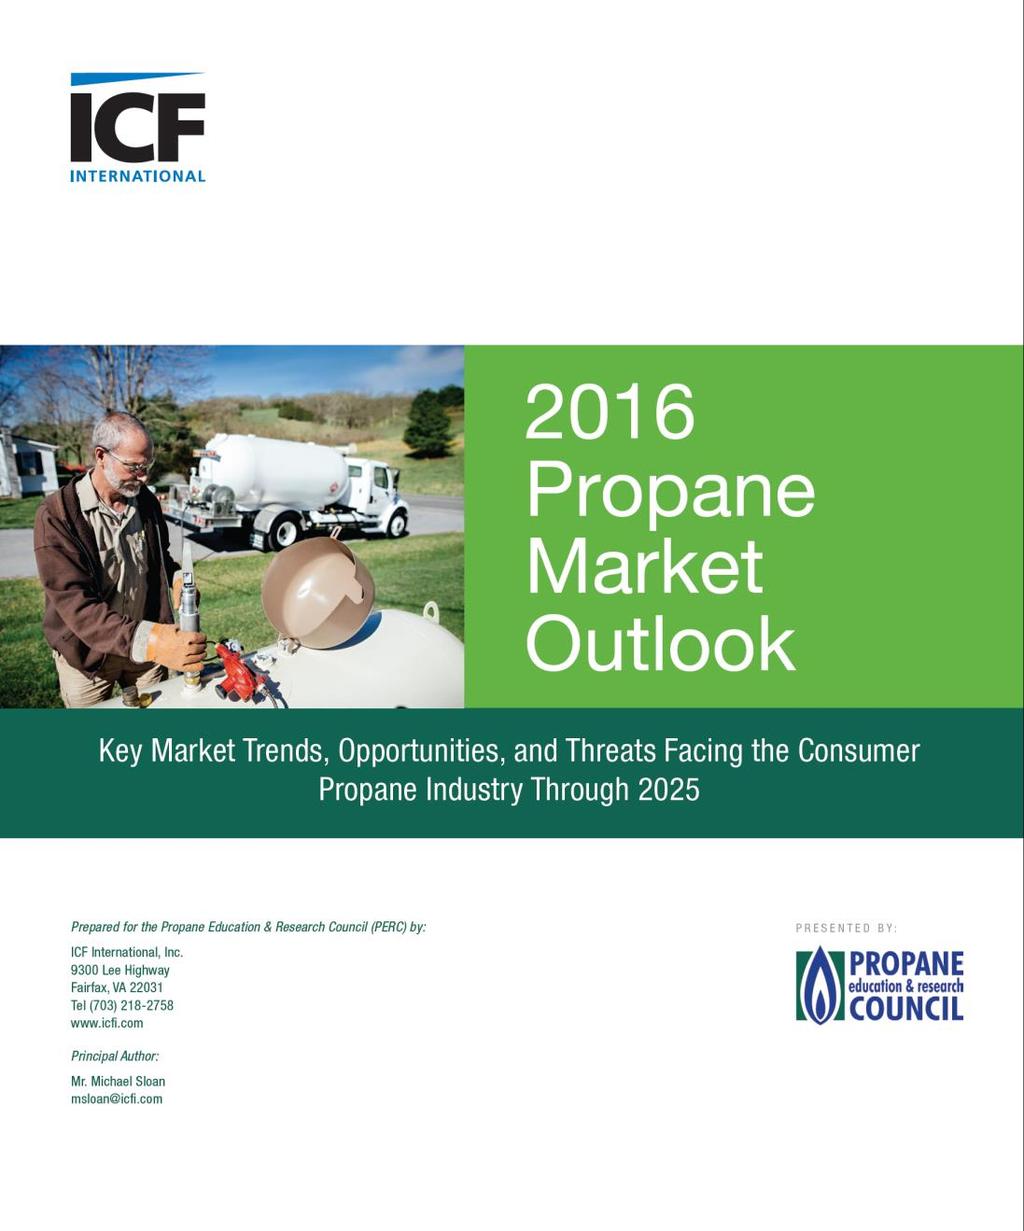 Much of the information in this presentation is available in the PERC report 2016 Propane Market Outlook